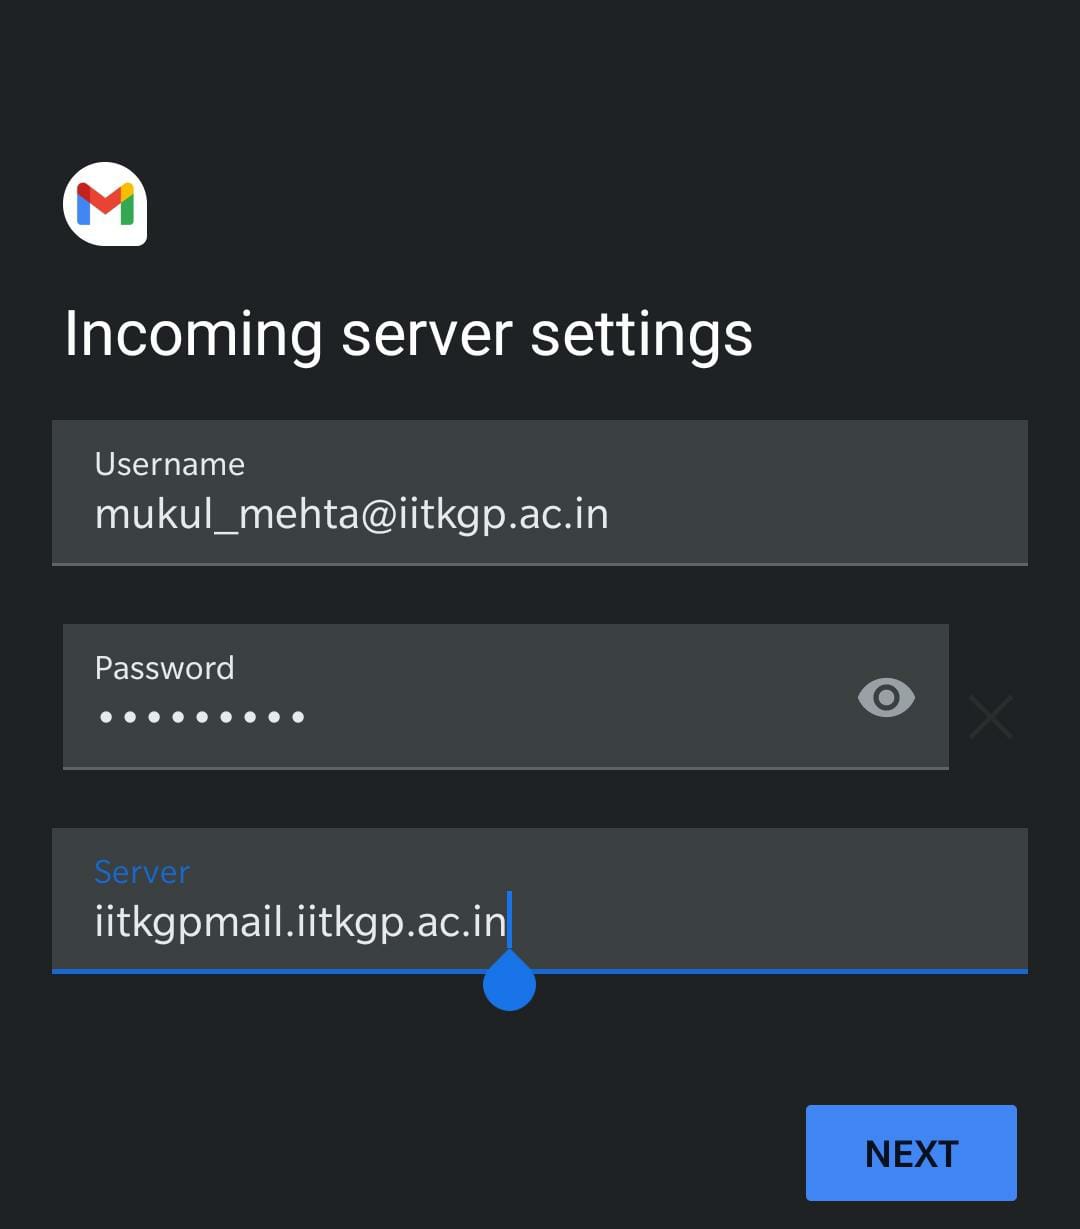 Add password and mail server